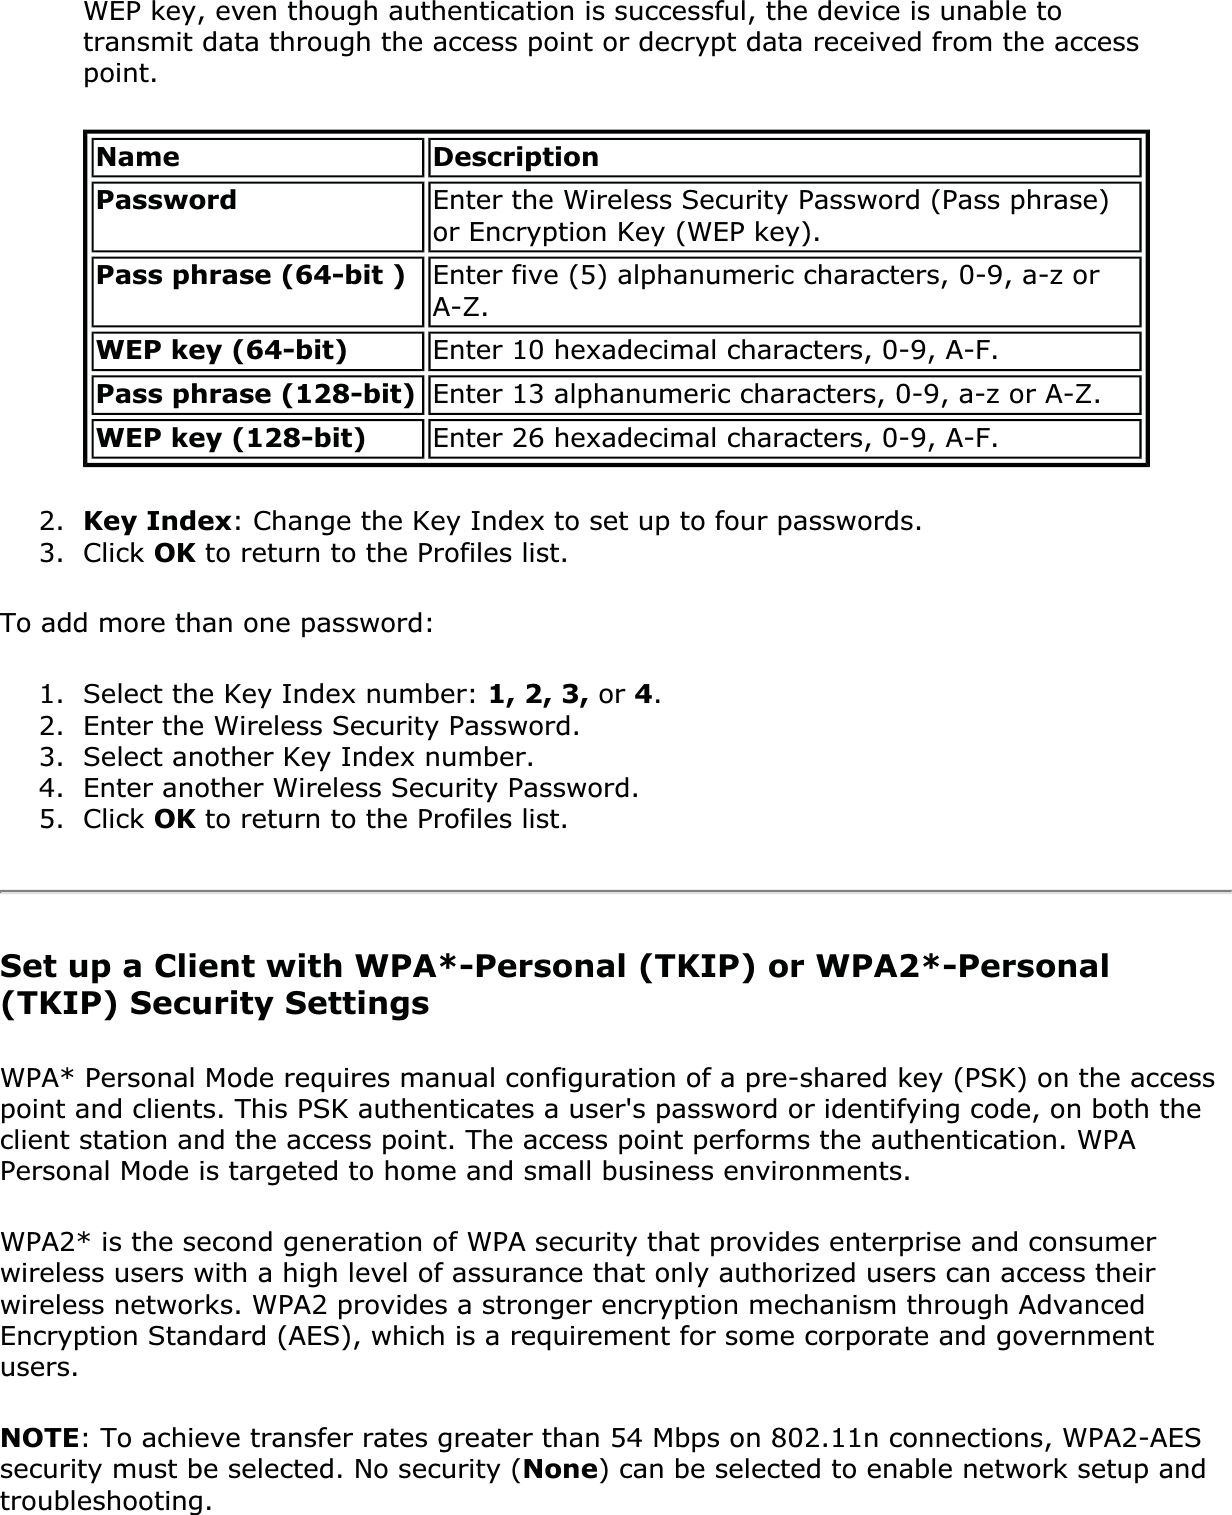 WEP key, even though authentication is successful, the device is unable to transmit data through the access point or decrypt data received from the access point.Name DescriptionPassword Enter the Wireless Security Password (Pass phrase) or Encryption Key (WEP key). Pass phrase (64-bit ) Enter five (5) alphanumeric characters, 0-9, a-z or A-Z.WEP key (64-bit) Enter 10 hexadecimal characters, 0-9, A-F.Pass phrase (128-bit) Enter 13 alphanumeric characters, 0-9, a-z or A-Z. WEP key (128-bit) Enter 26 hexadecimal characters, 0-9, A-F.2. Key Index: Change the Key Index to set up to four passwords. 3. Click OK to return to the Profiles list.To add more than one password: 1. Select the Key Index number: 1, 2, 3, or 4.2. Enter the Wireless Security Password.3. Select another Key Index number.4. Enter another Wireless Security Password.5. Click OK to return to the Profiles list.Set up a Client with WPA*-Personal (TKIP) or WPA2*-Personal (TKIP) Security SettingsWPA* Personal Mode requires manual configuration of a pre-shared key (PSK) on the access point and clients. This PSK authenticates a user&apos;s password or identifying code, on both the client station and the access point. The access point performs the authentication. WPA Personal Mode is targeted to home and small business environments. WPA2* is the second generation of WPA security that provides enterprise and consumer wireless users with a high level of assurance that only authorized users can access their wireless networks. WPA2 provides a stronger encryption mechanism through Advanced Encryption Standard (AES), which is a requirement for some corporate and government users.NOTE: To achieve transfer rates greater than 54 Mbps on 802.11n connections, WPA2-AES security must be selected. No security (None) can be selected to enable network setup and troubleshooting.